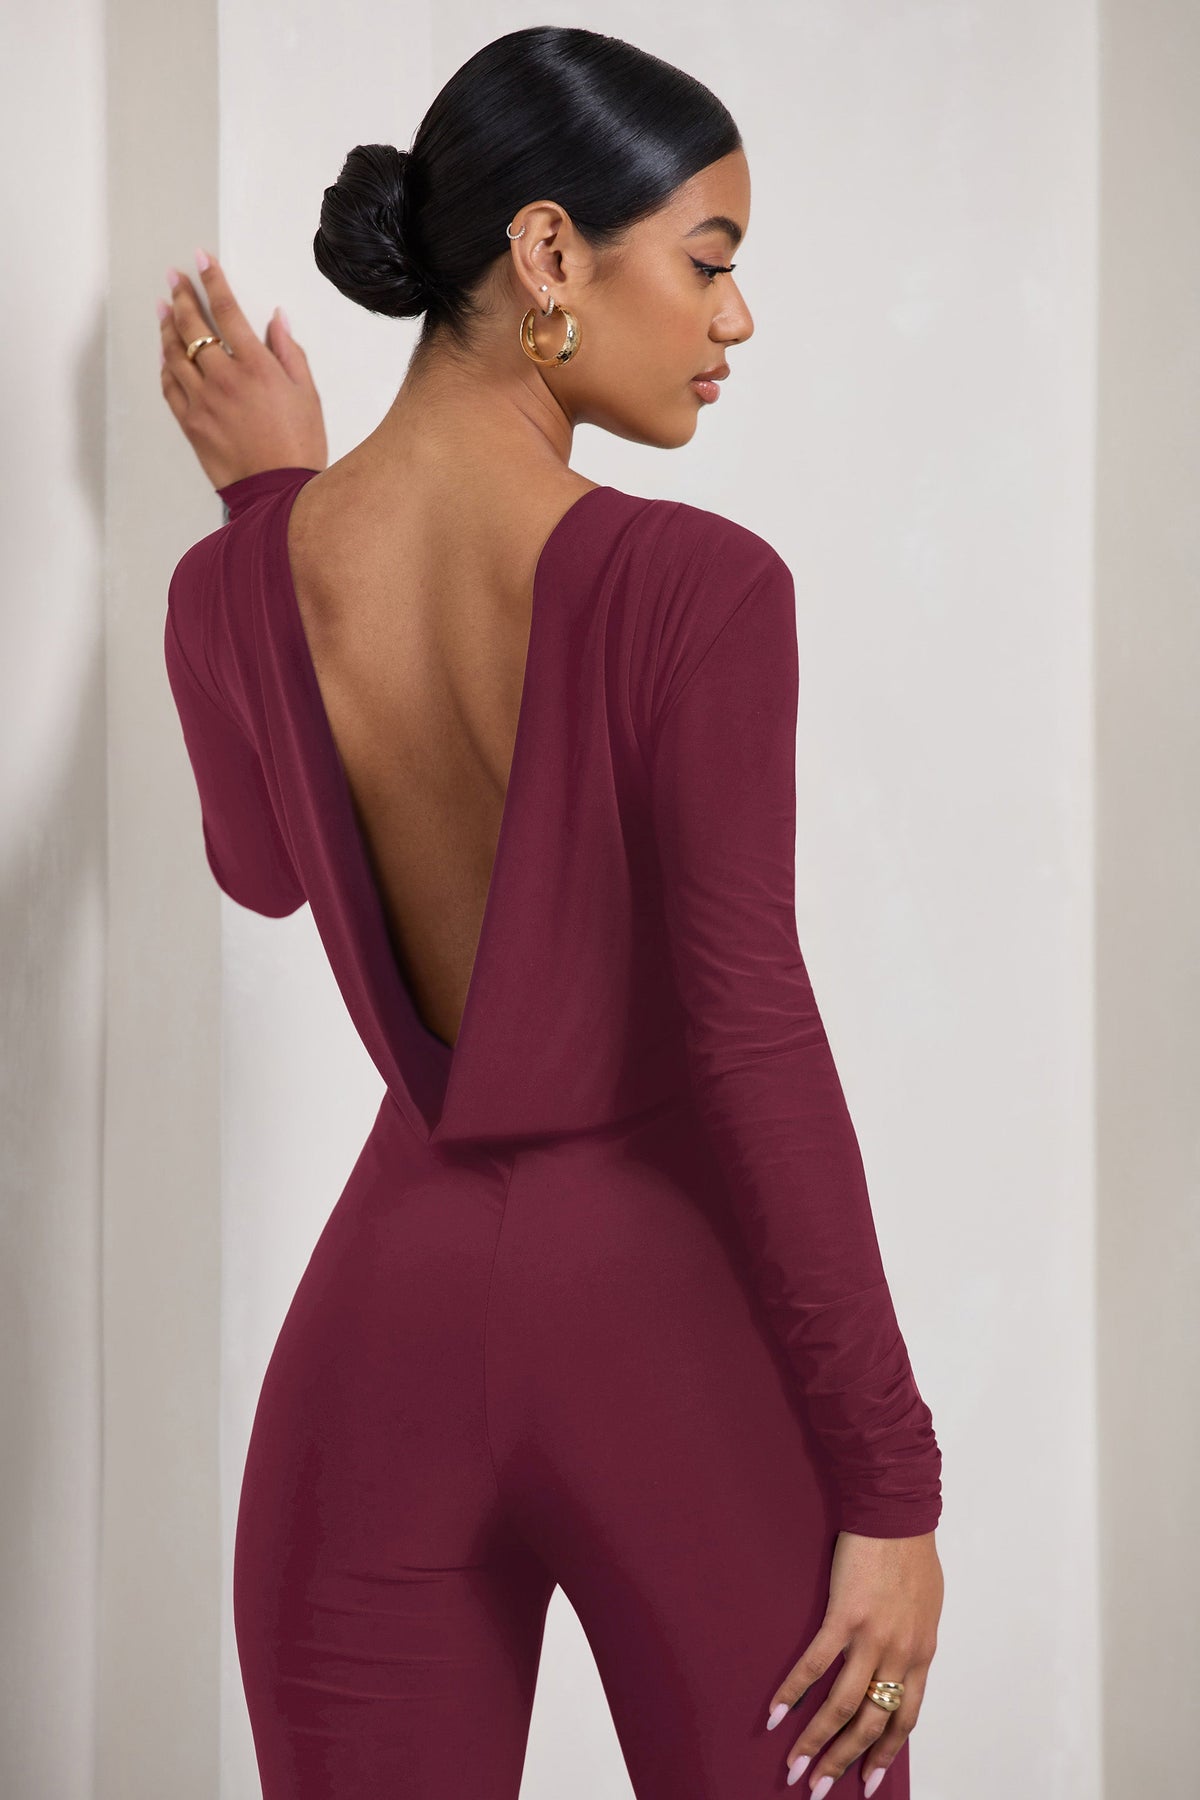 Stylish New Women Lowcut Long Sleeves Open Front Bodycon Club Short Jumpsuit